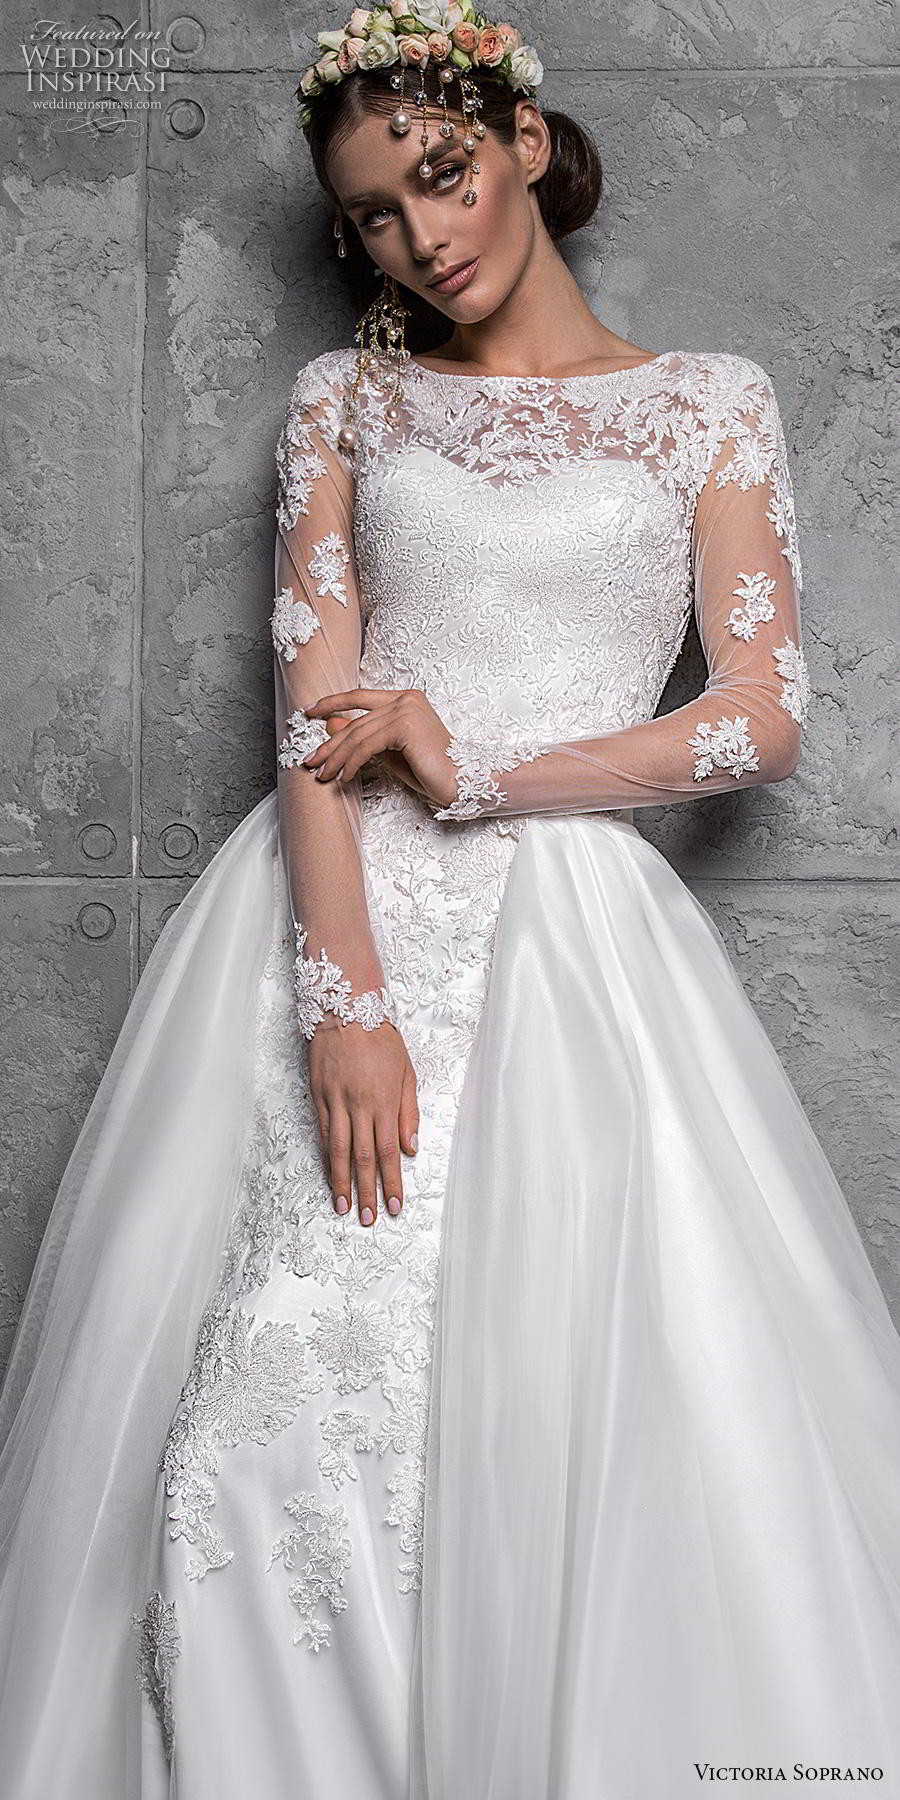 Wedding Gowns 2020 Collection
 Victoria Soprano 2020 Wedding Dresses — “Chic Royal